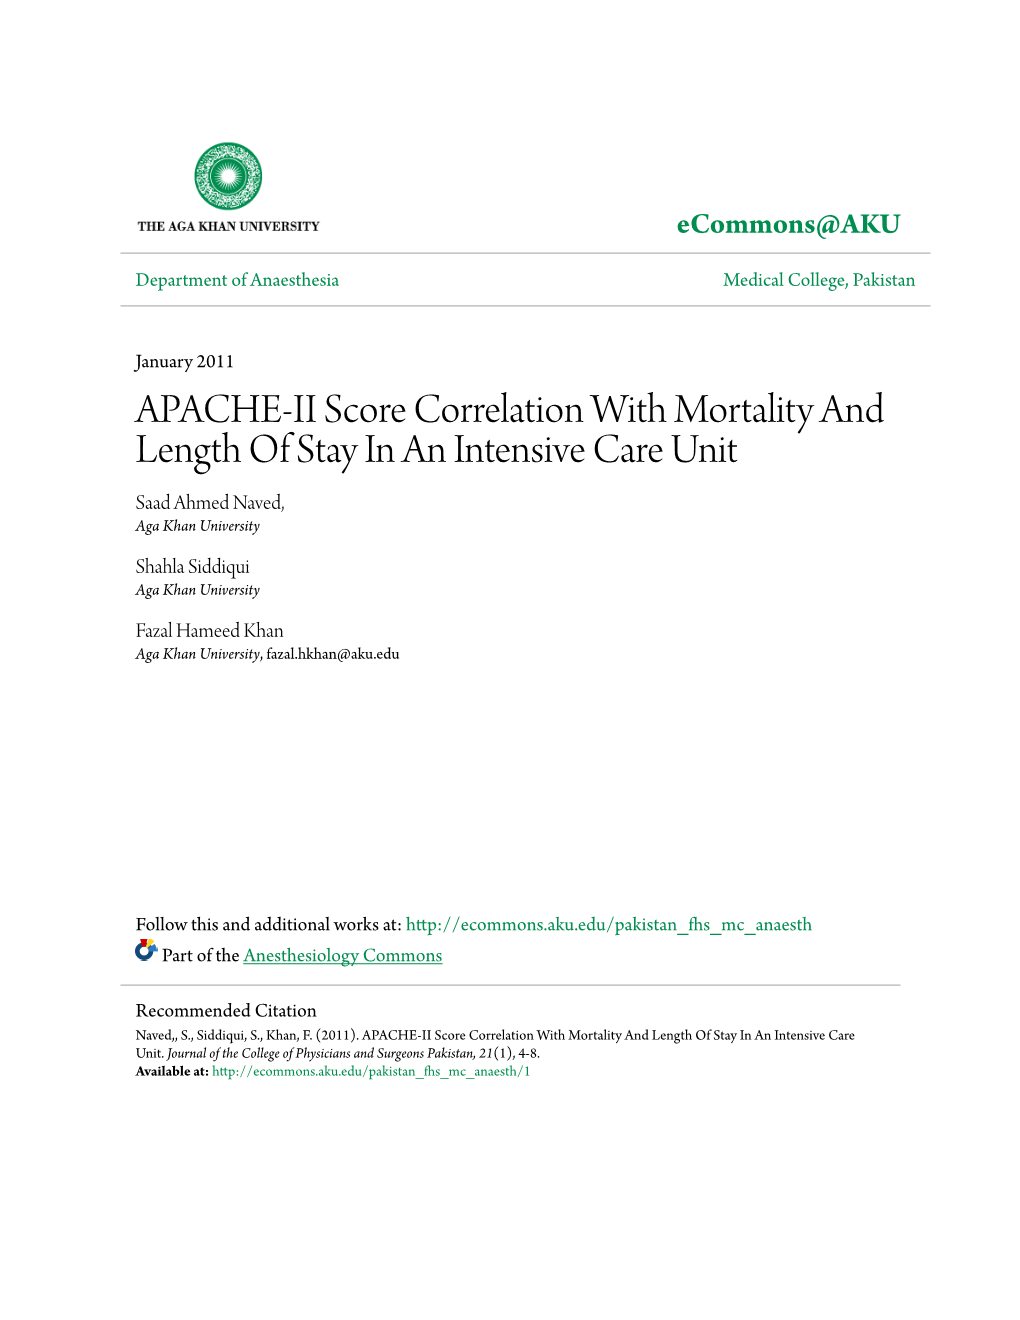 APACHE-II Score Correlation with Mortality and Length of Stay in an Intensive Care Unit Saad Ahmed Naved, Aga Khan University